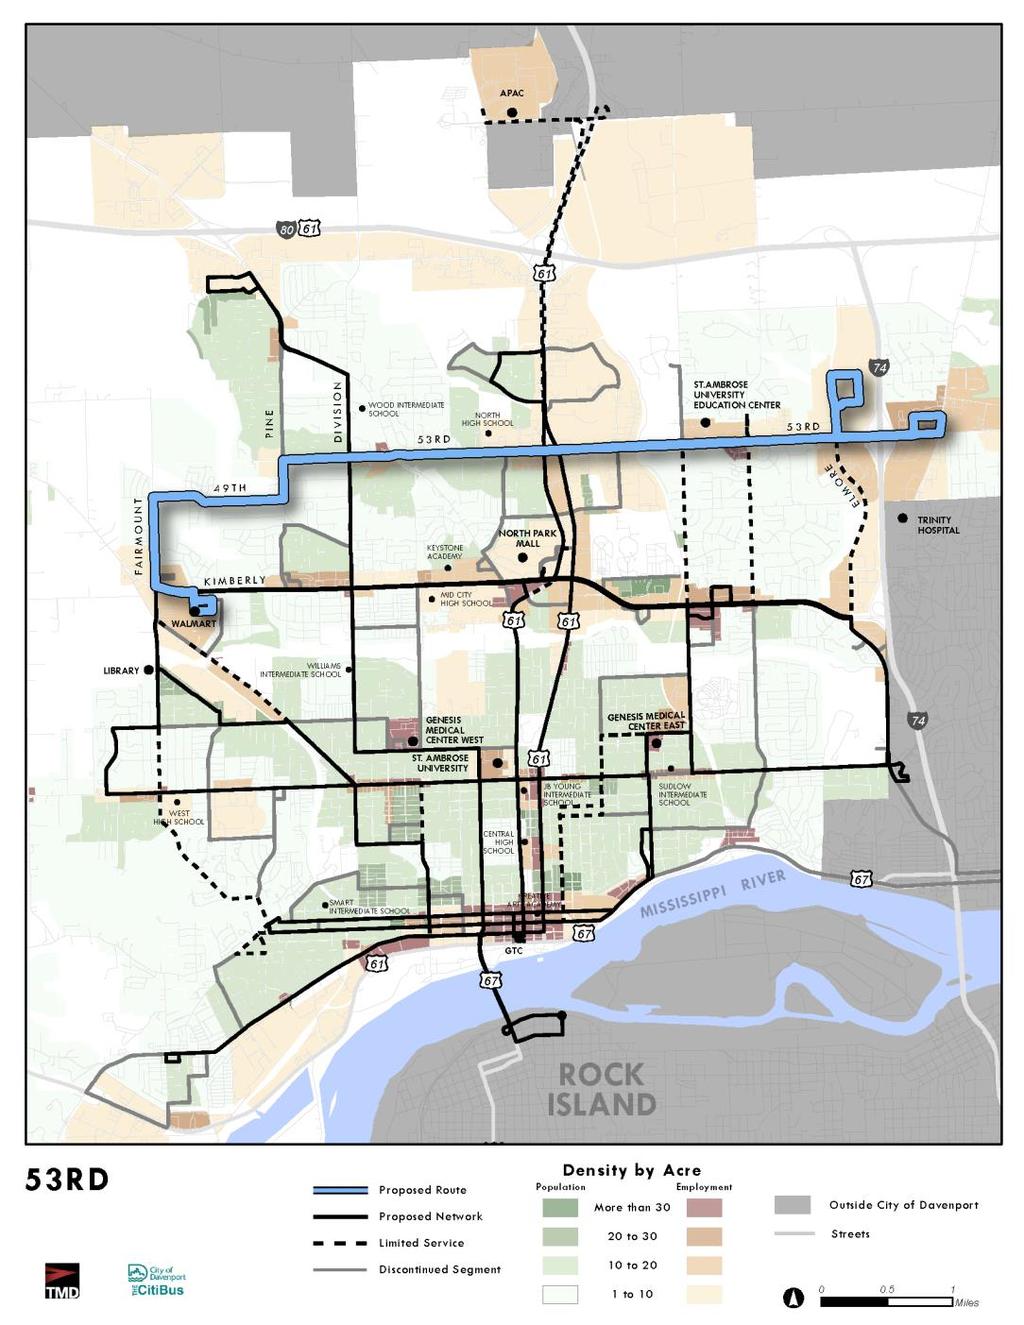 Proposed Davenport Public Transportation Plan 53 rd Street The proposed 53 rd Street route combines elements of existing CitiBus Routes 6 and 53 to provide continuous east/west cross-town service on